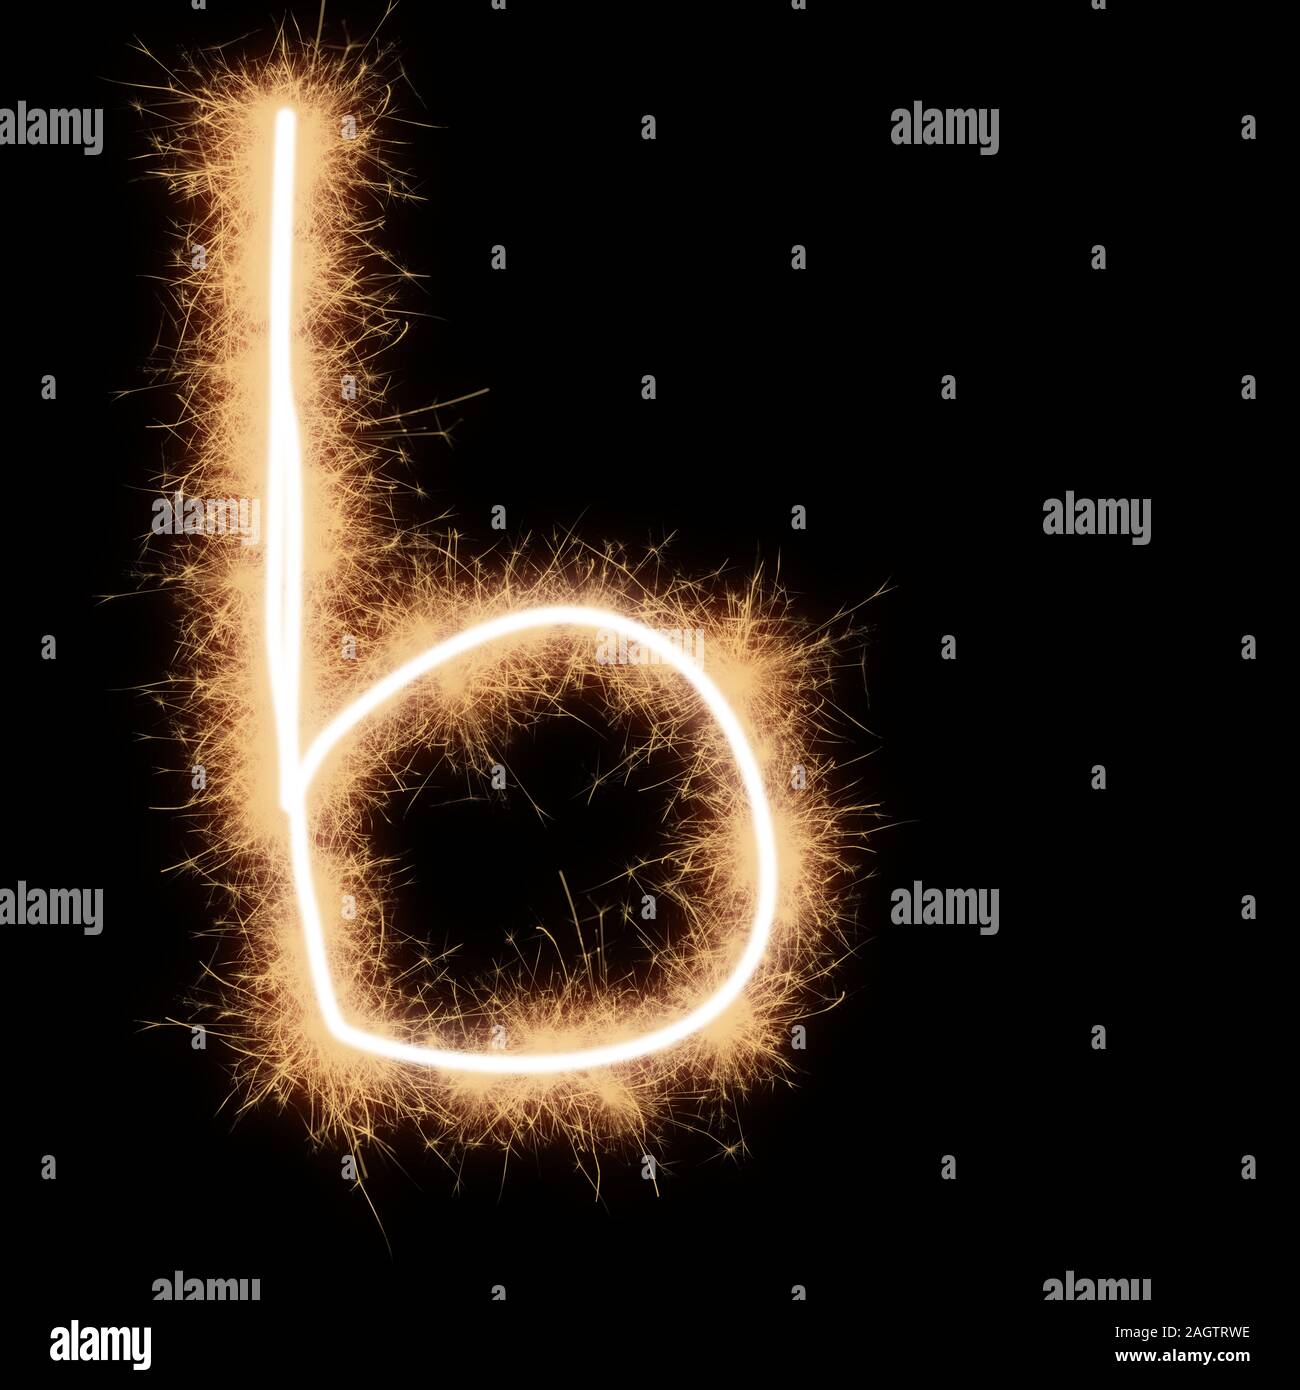 Lower case b letter of alphabet written by squib sparks on a black background. Stock Photo